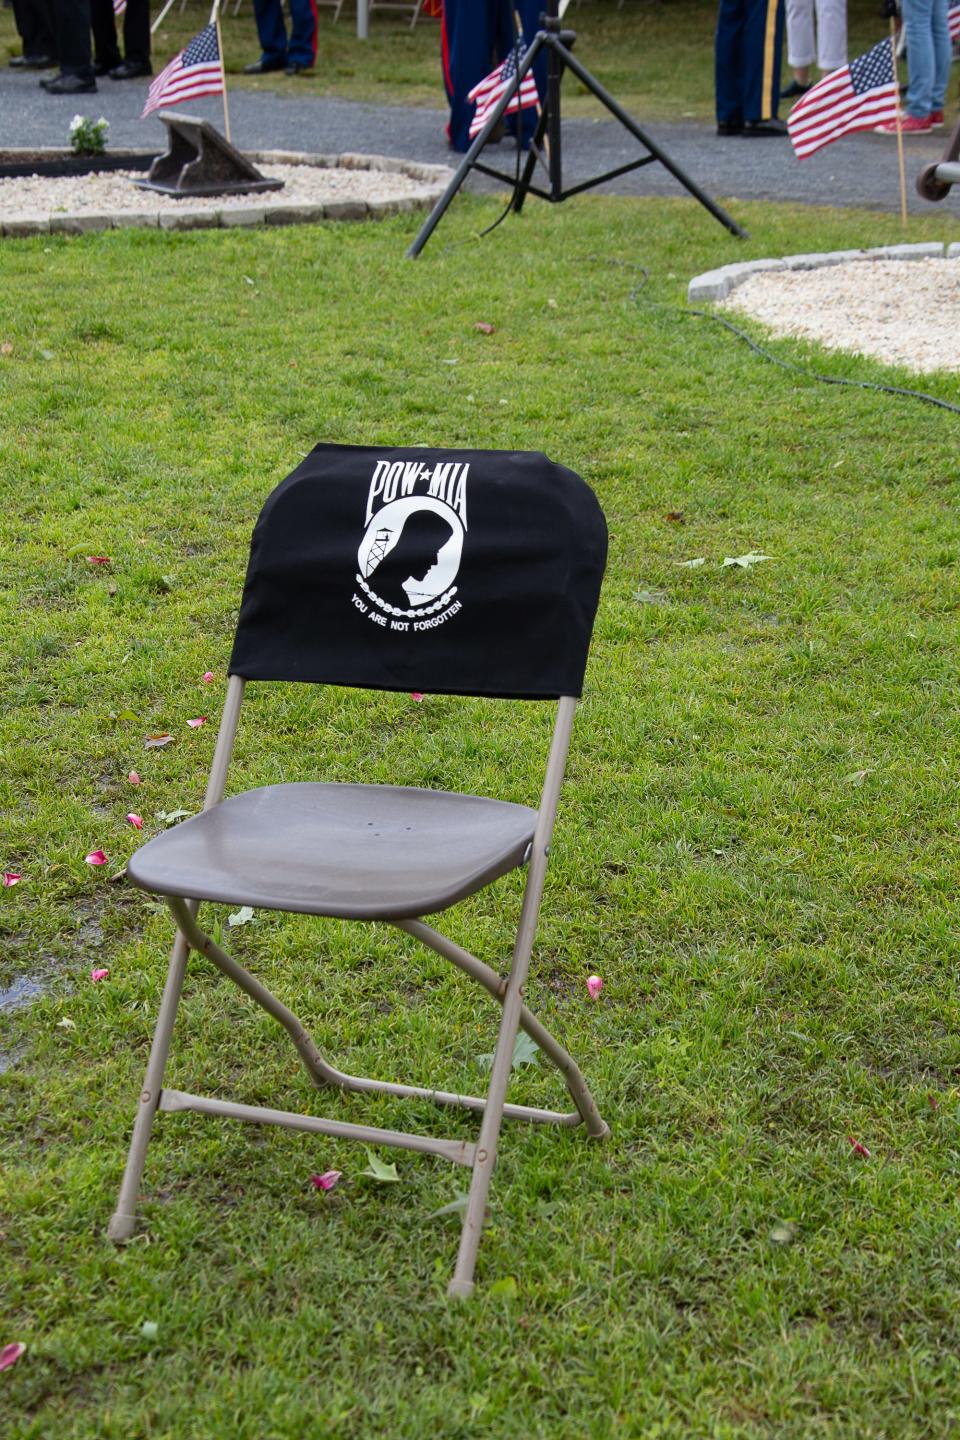 A chair covered with POW-MIA flag honors those missing at a Memorial Day service.